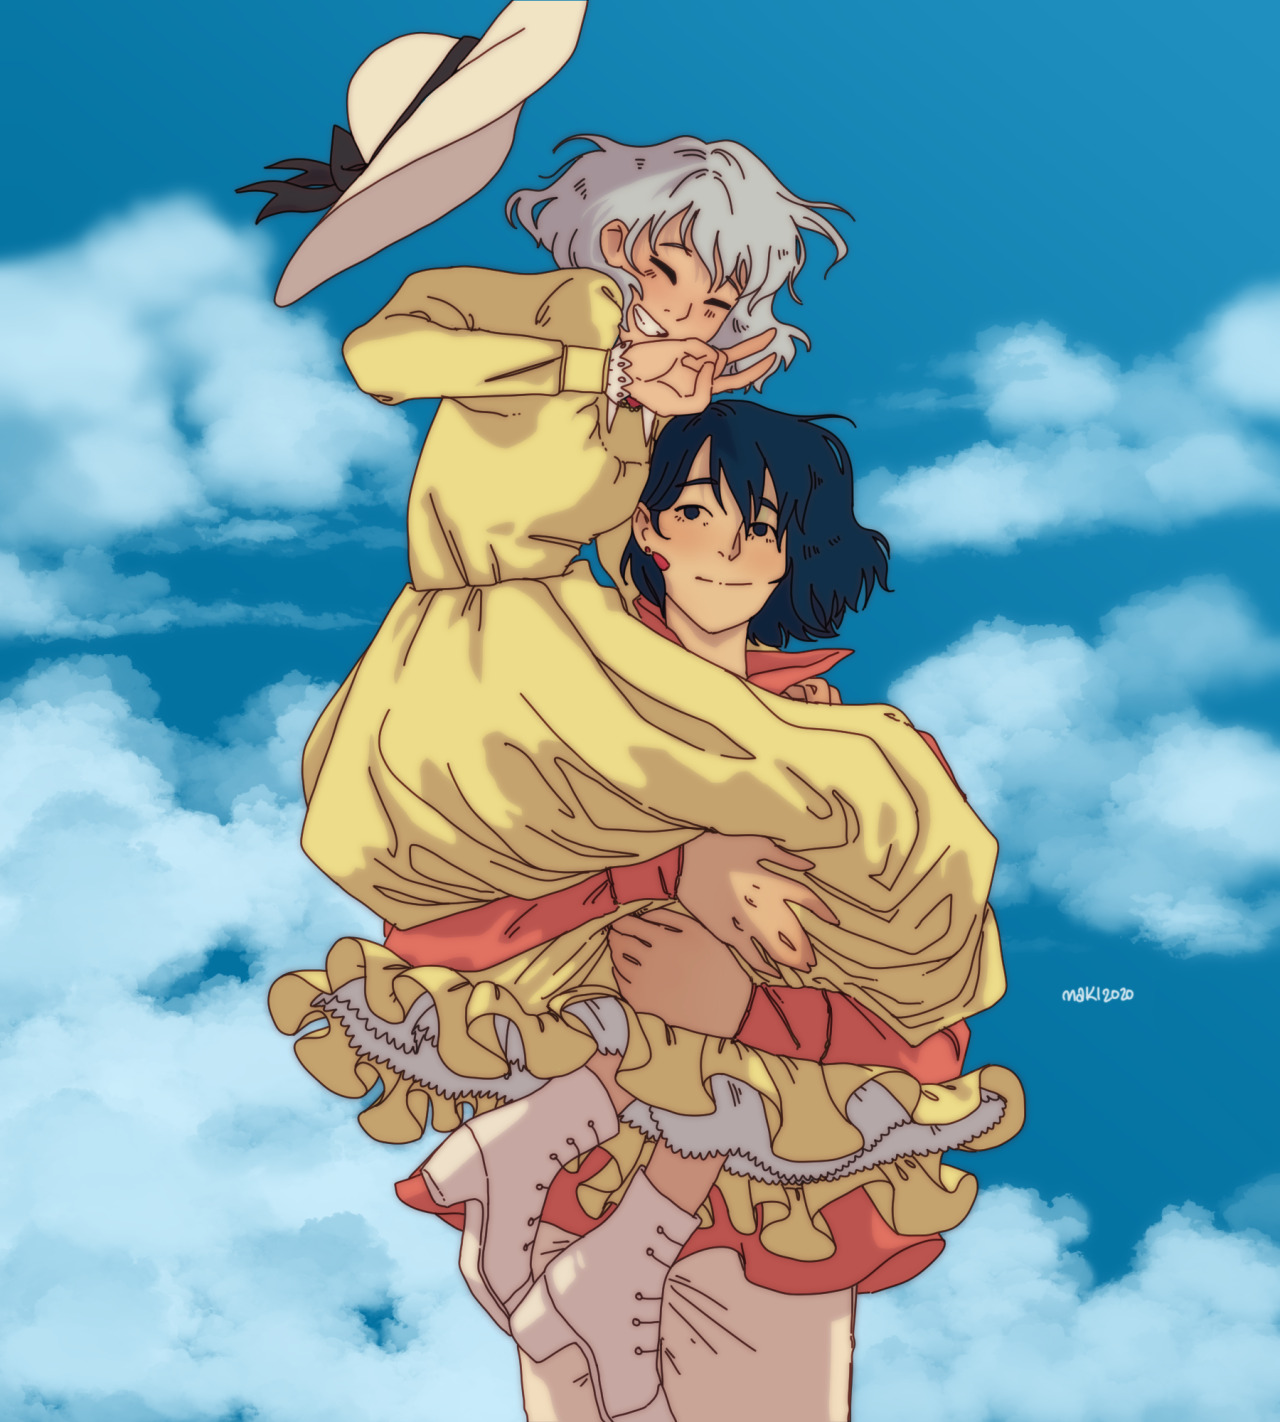 howl and sophie from last year that i still absolutely adoreyou can now buy it as a print here #howls moving castle  #howls moving castle #studio ghibli#ghibli#ghibli art#ghibli fanart #howls moving castle fanart  #howl and sophie #my art